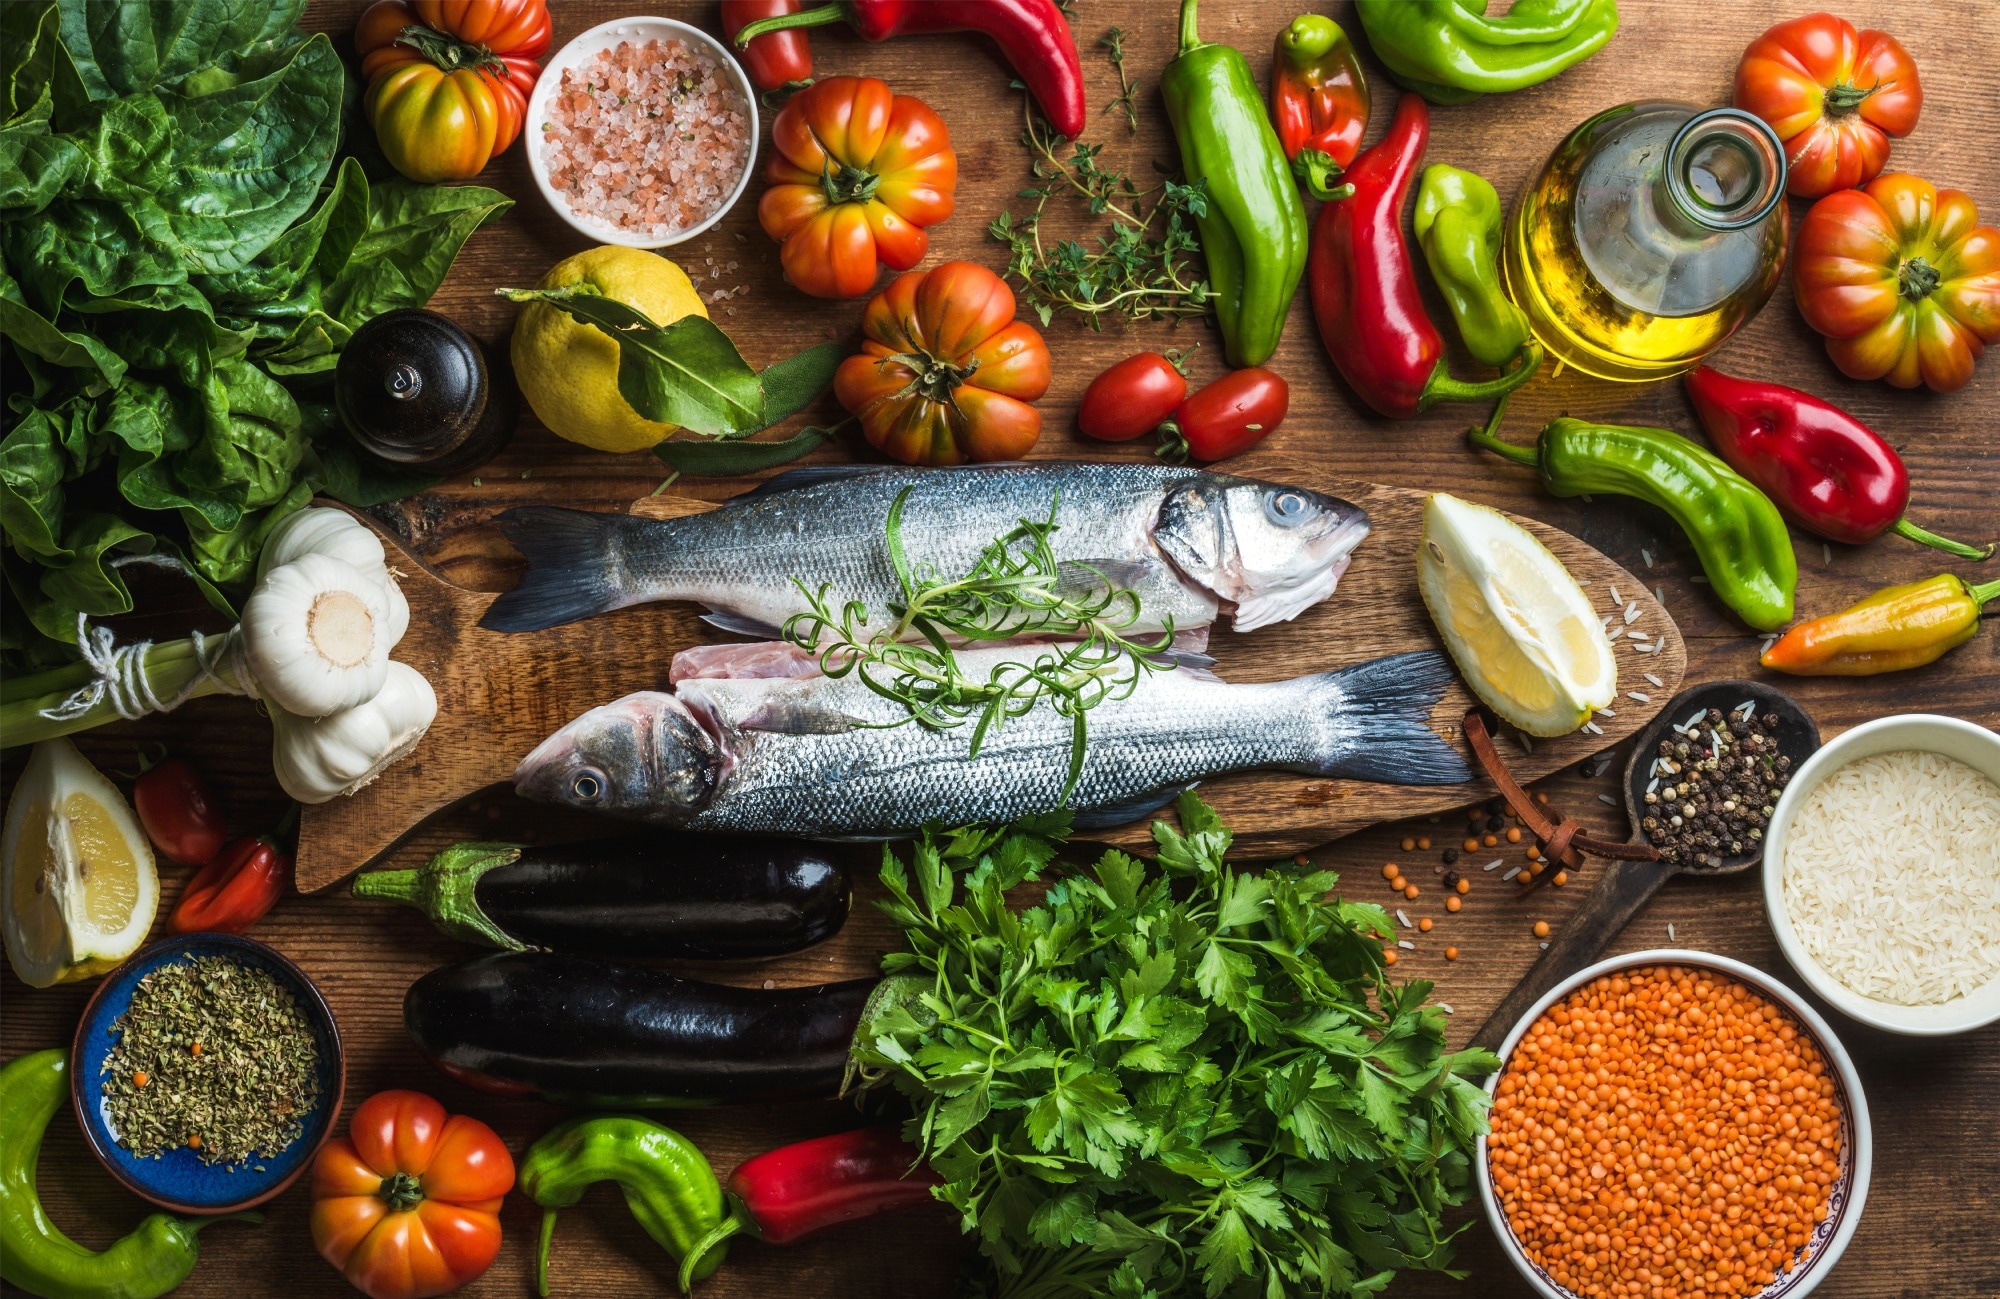 Study: Mediterranean diet in the management and prevention of obesity. Image Credit: Foxys Forest Manufacture/Shutterstock